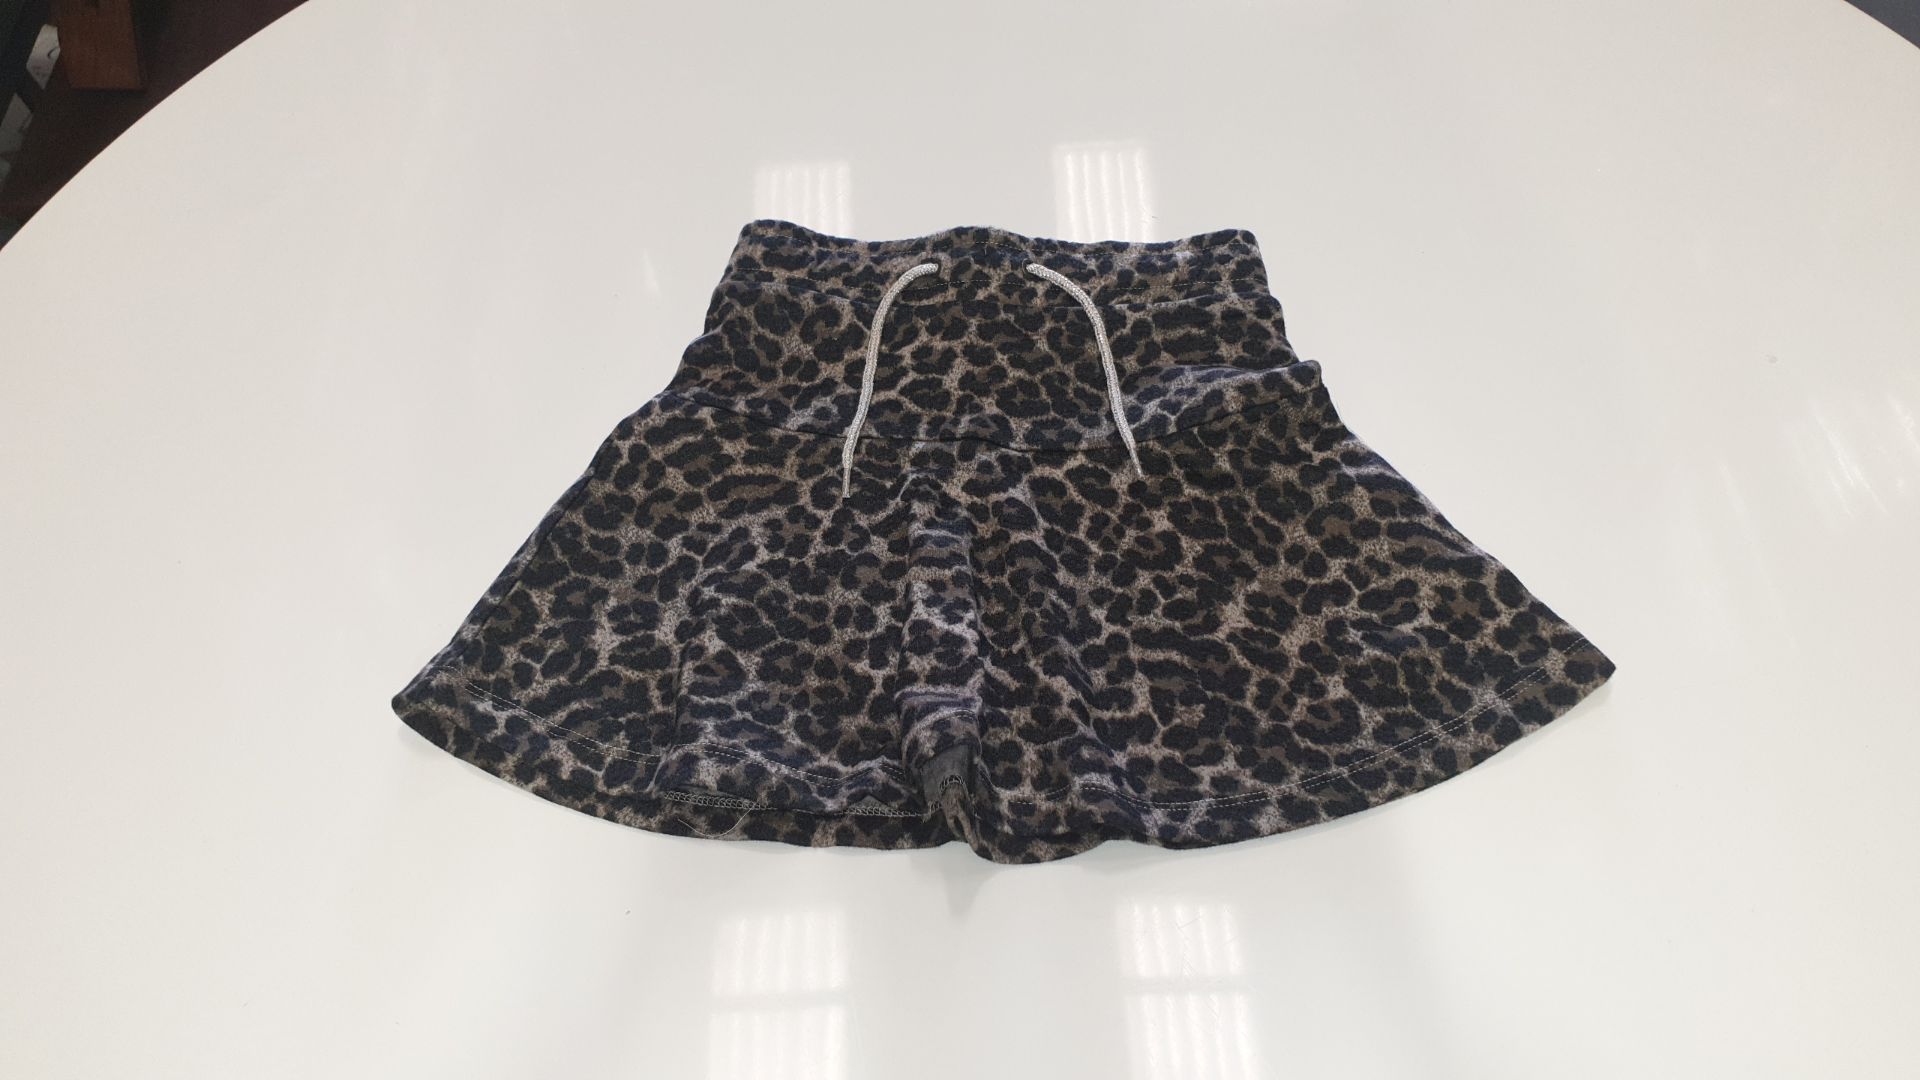 10 X BRAND NEW KIDS ONLY LEOPARD PRINT SKIRT SIZE 122-128 (7 - 8 YEARS)